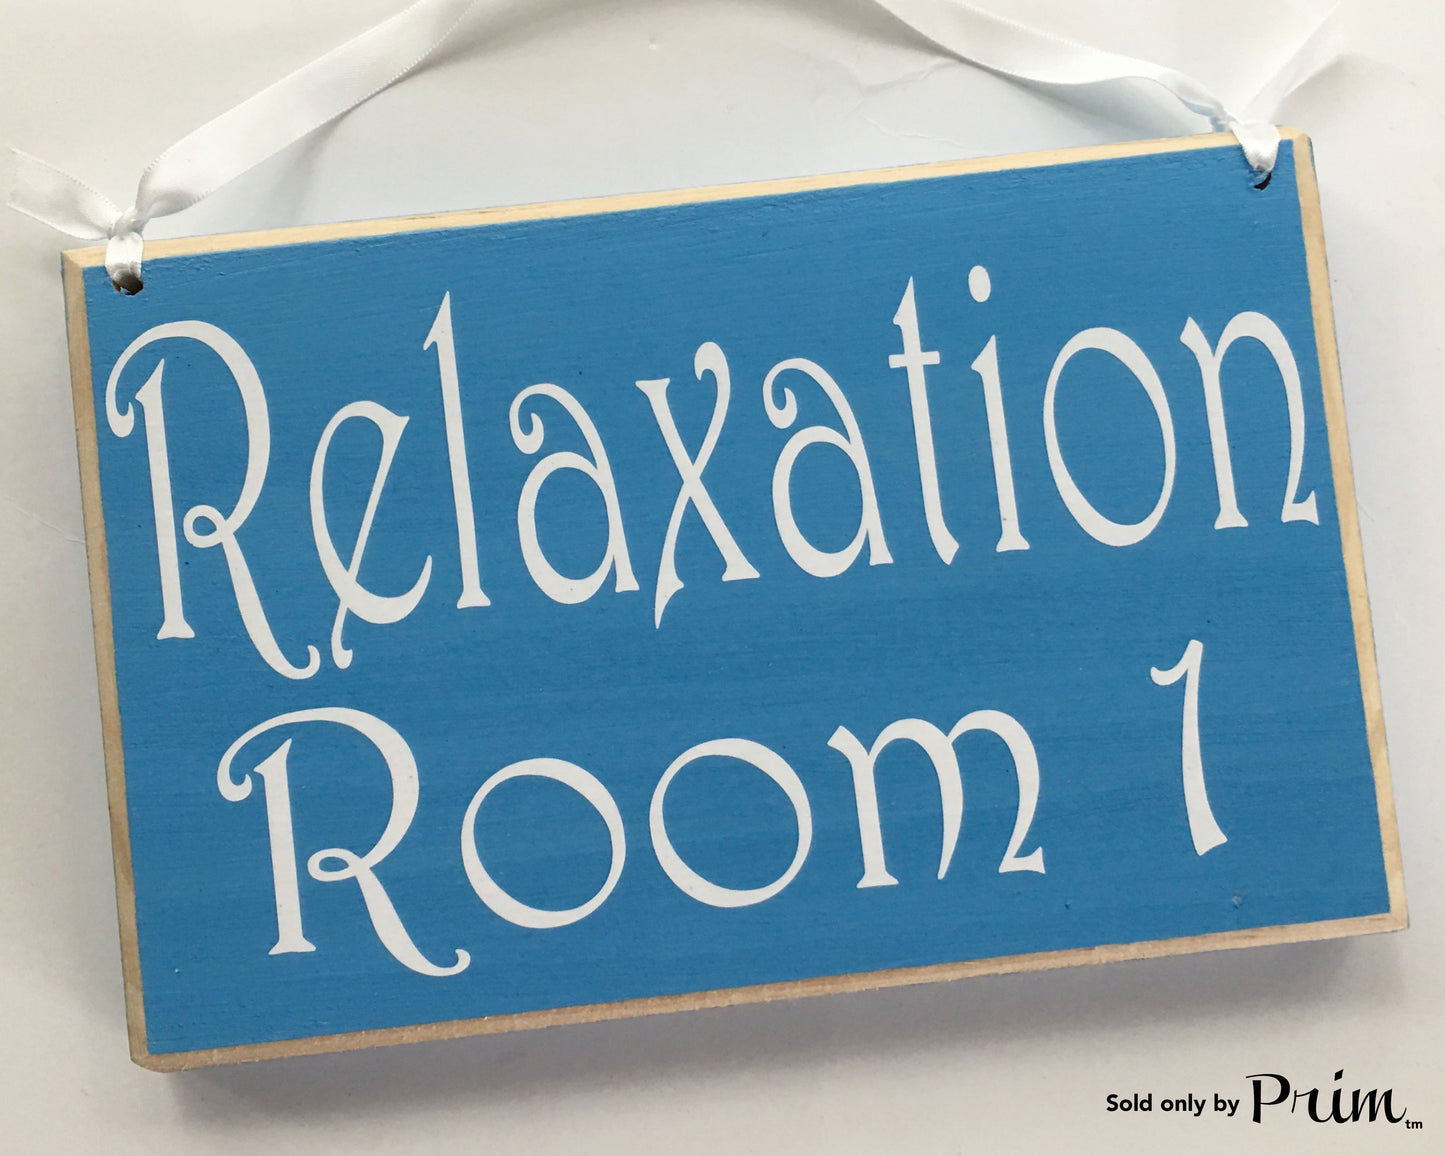 8x6 Relaxation Room Number (Choose Color) Custom Wood Sign Welcome Home Office Spa Reflexology Massage Meditation Waiting Room Patient Door